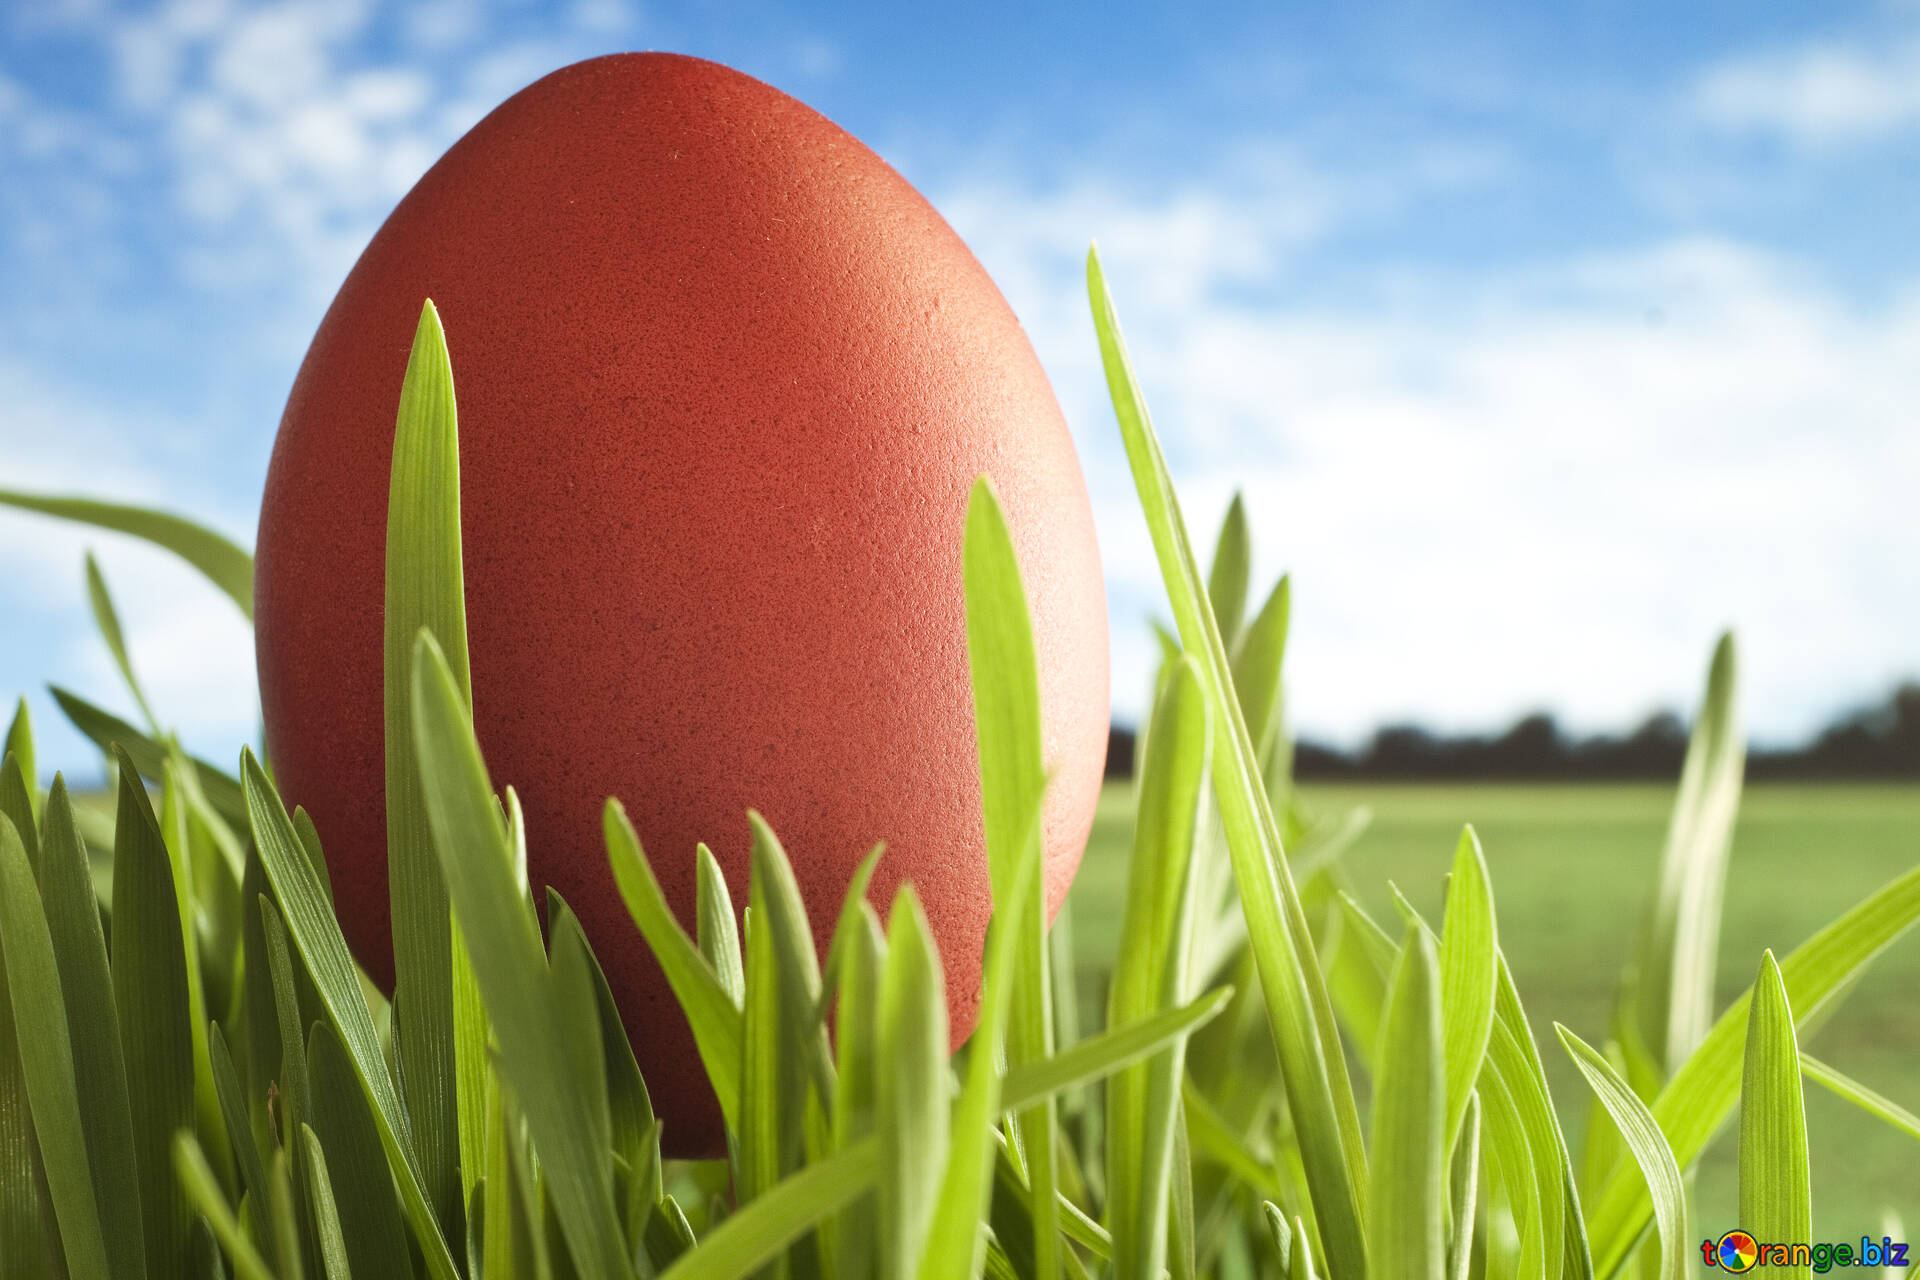 Red Easter Eggs Image Picture Wallpaper For Desktop At Easter. Image Grass № 8179. Torange.biz Free Pics On Cc By License